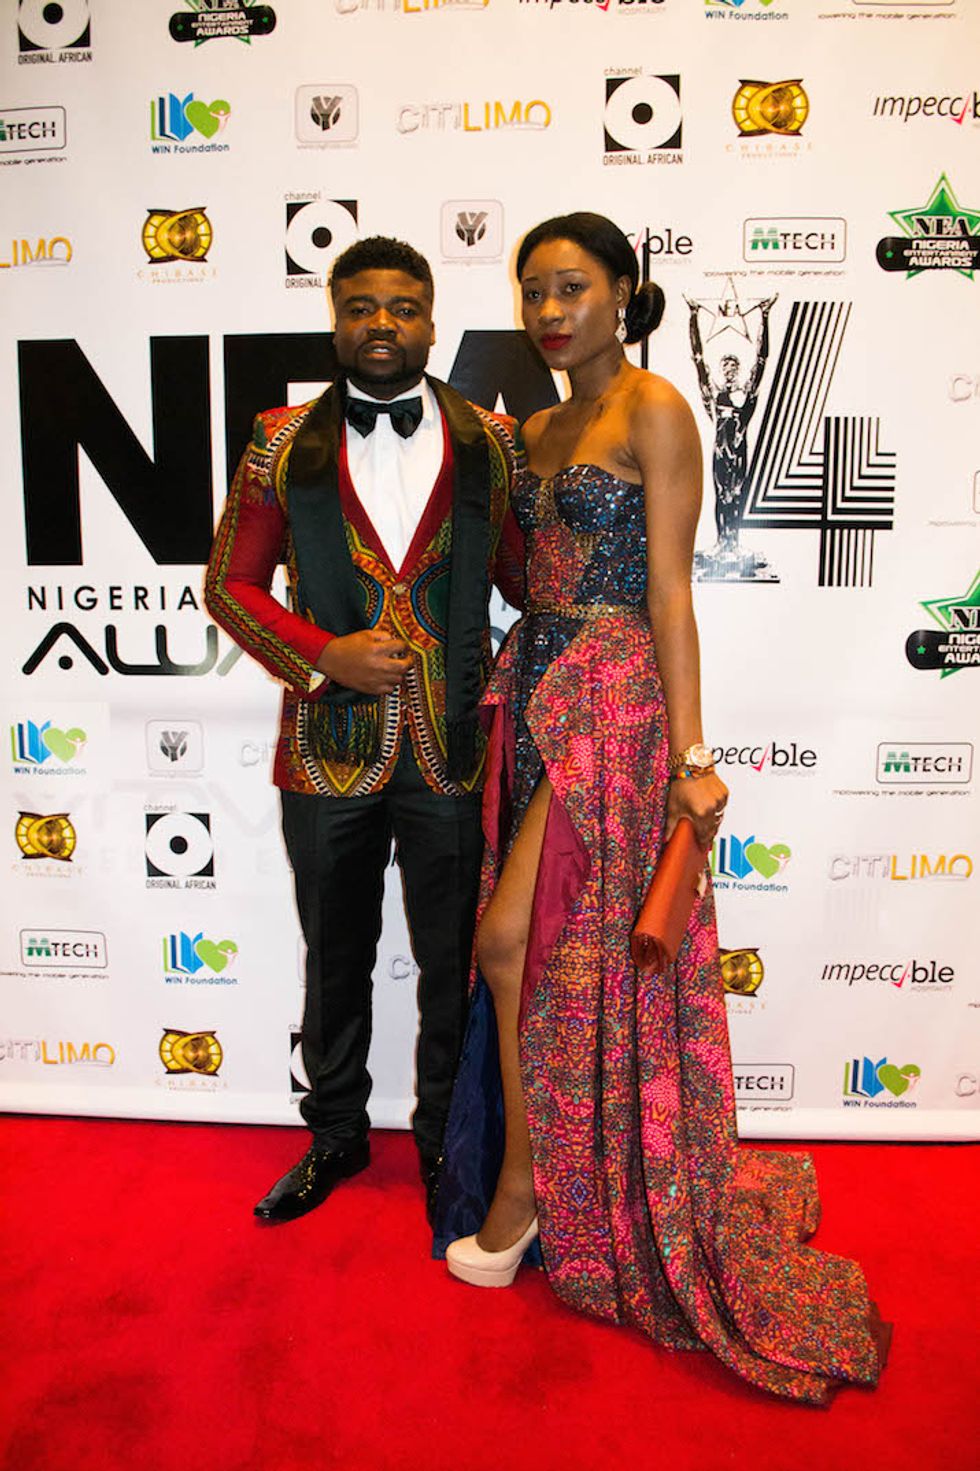 On The Red Carpet At The Nigerian Entertainment Awards